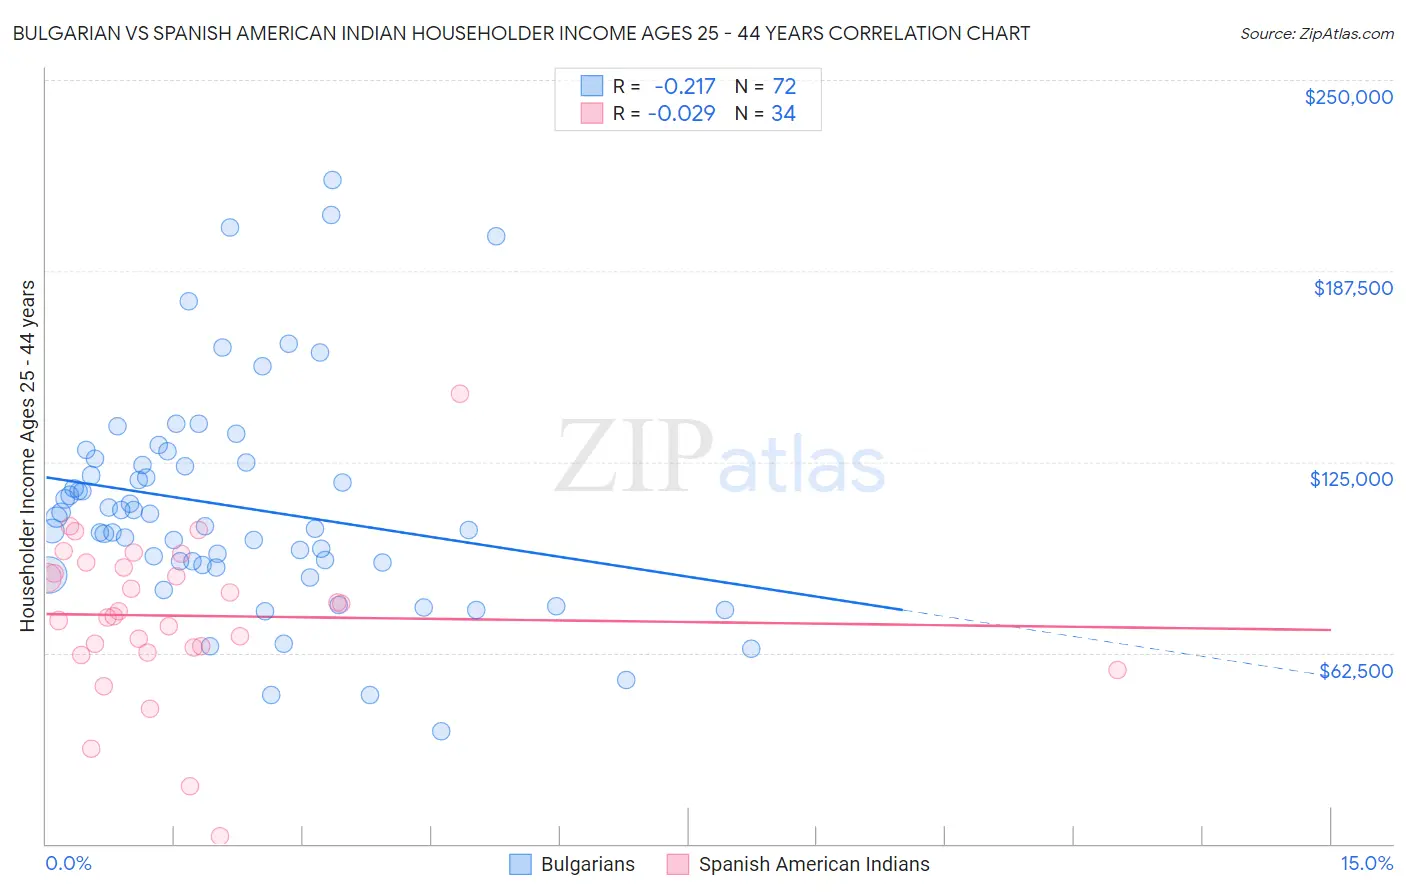 Bulgarian vs Spanish American Indian Householder Income Ages 25 - 44 years